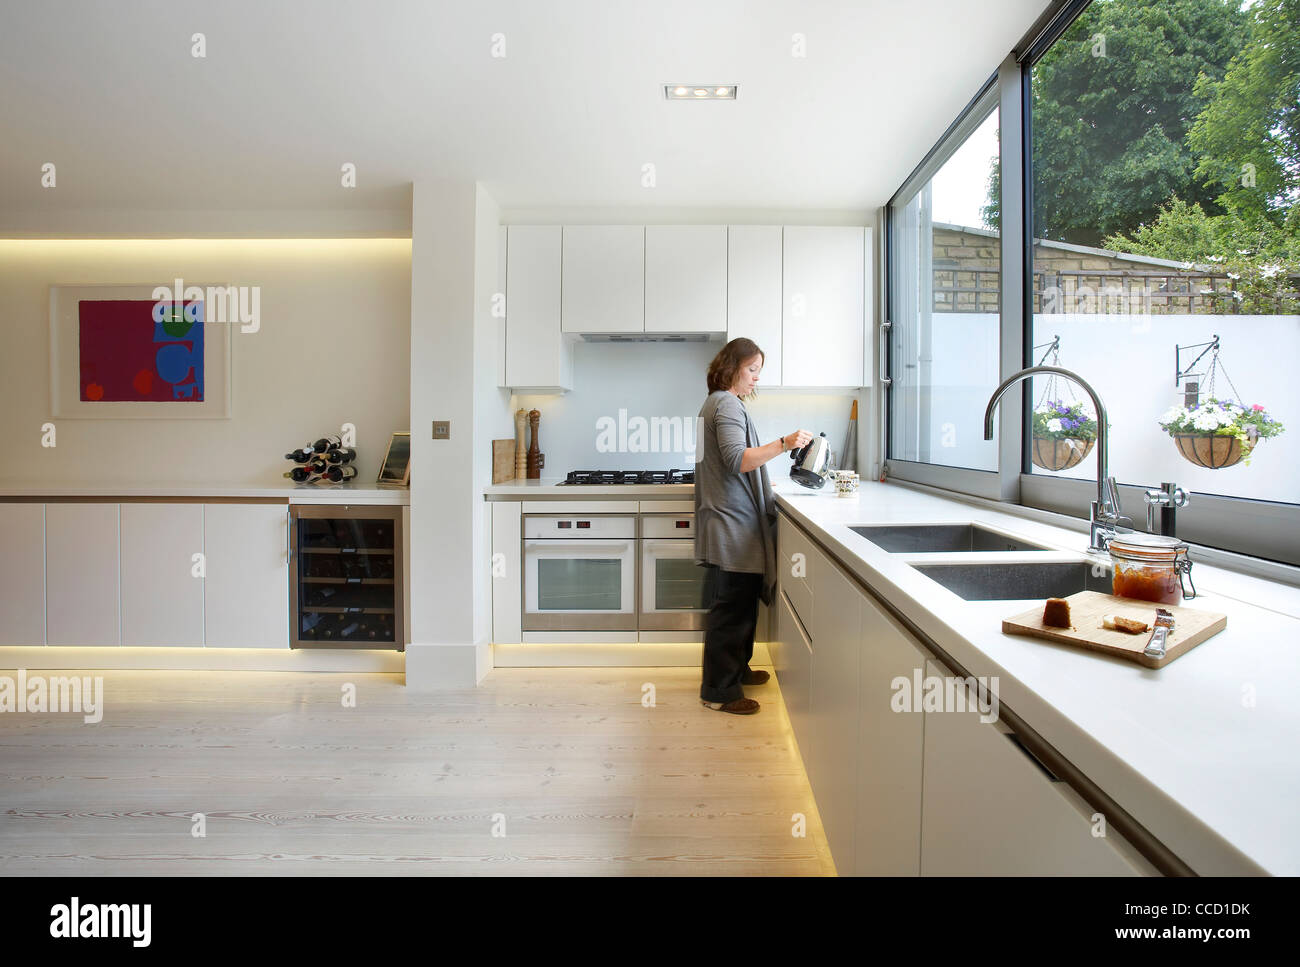 PRIVATE HOUSE, BUCKLEY GRAY YEOMAN, LONDON, 2010, WOMAN IN LARGE KITCHEN Stock Photo